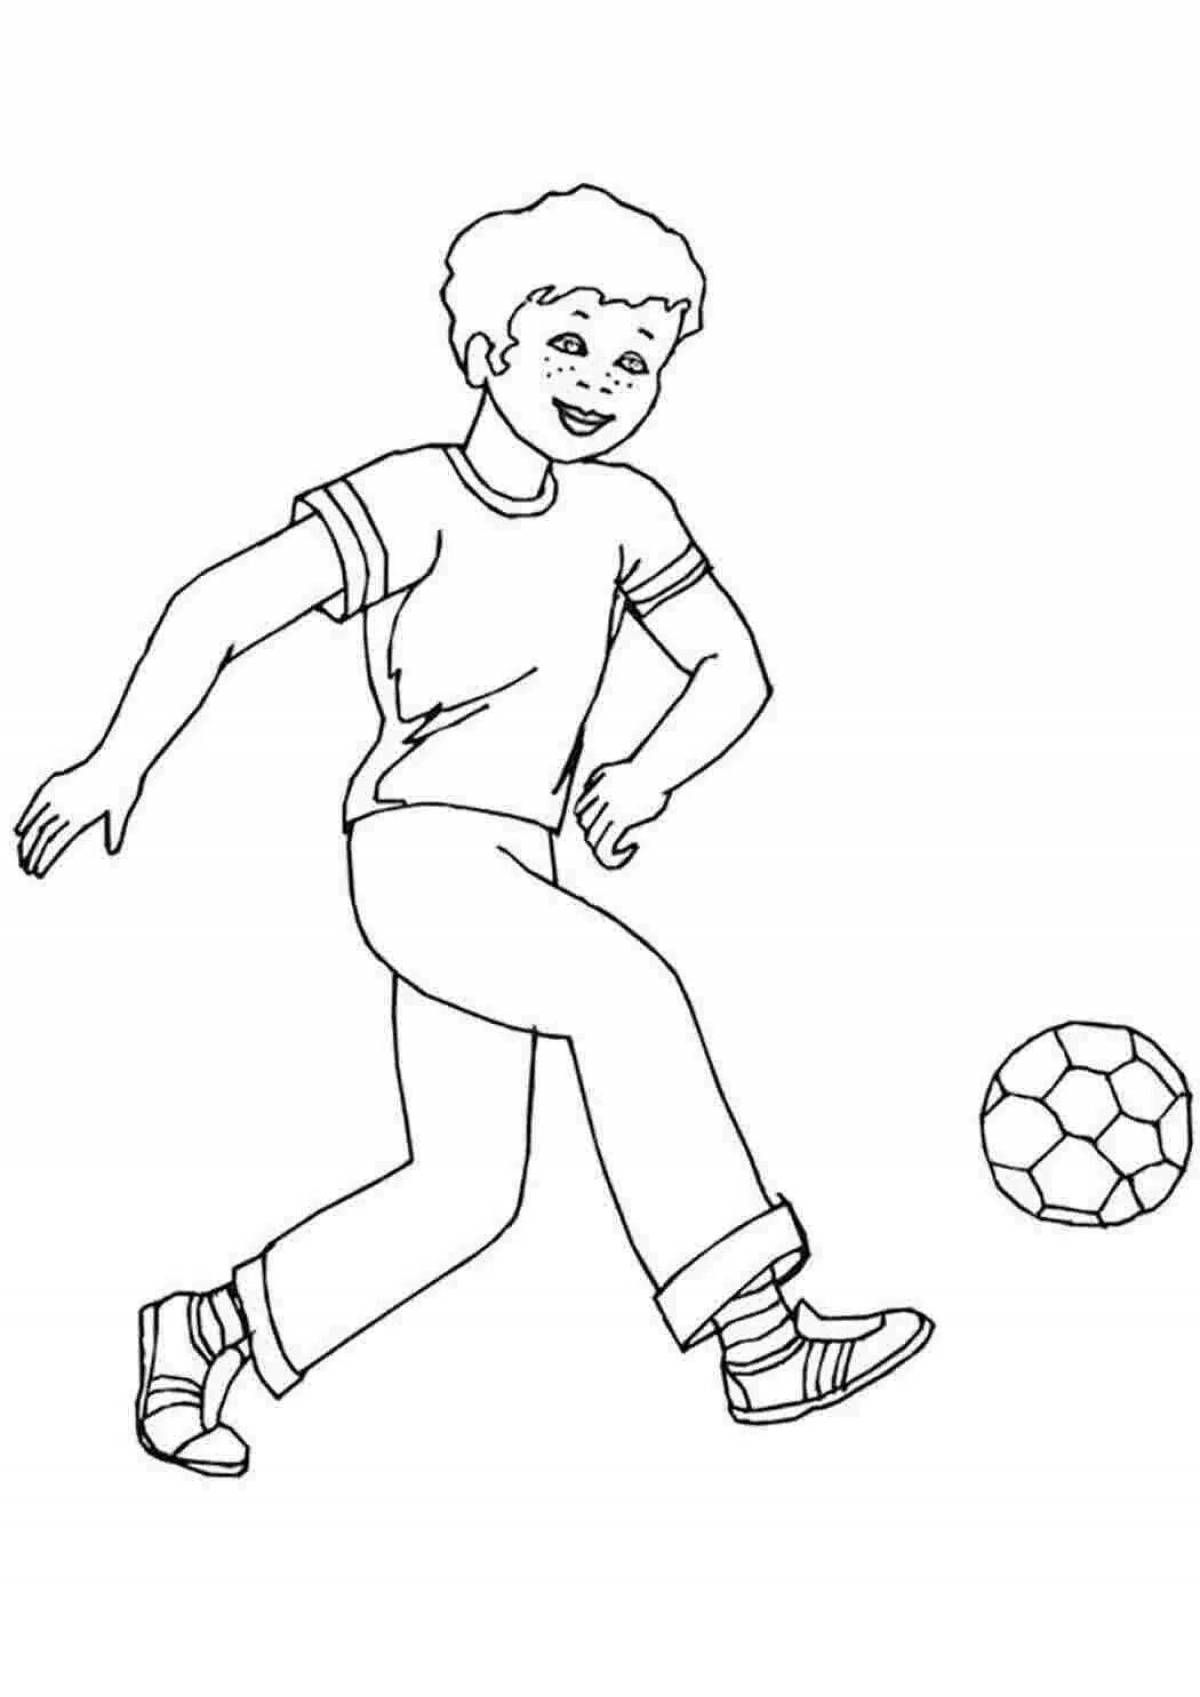 Boy in high spirits playing football coloring book